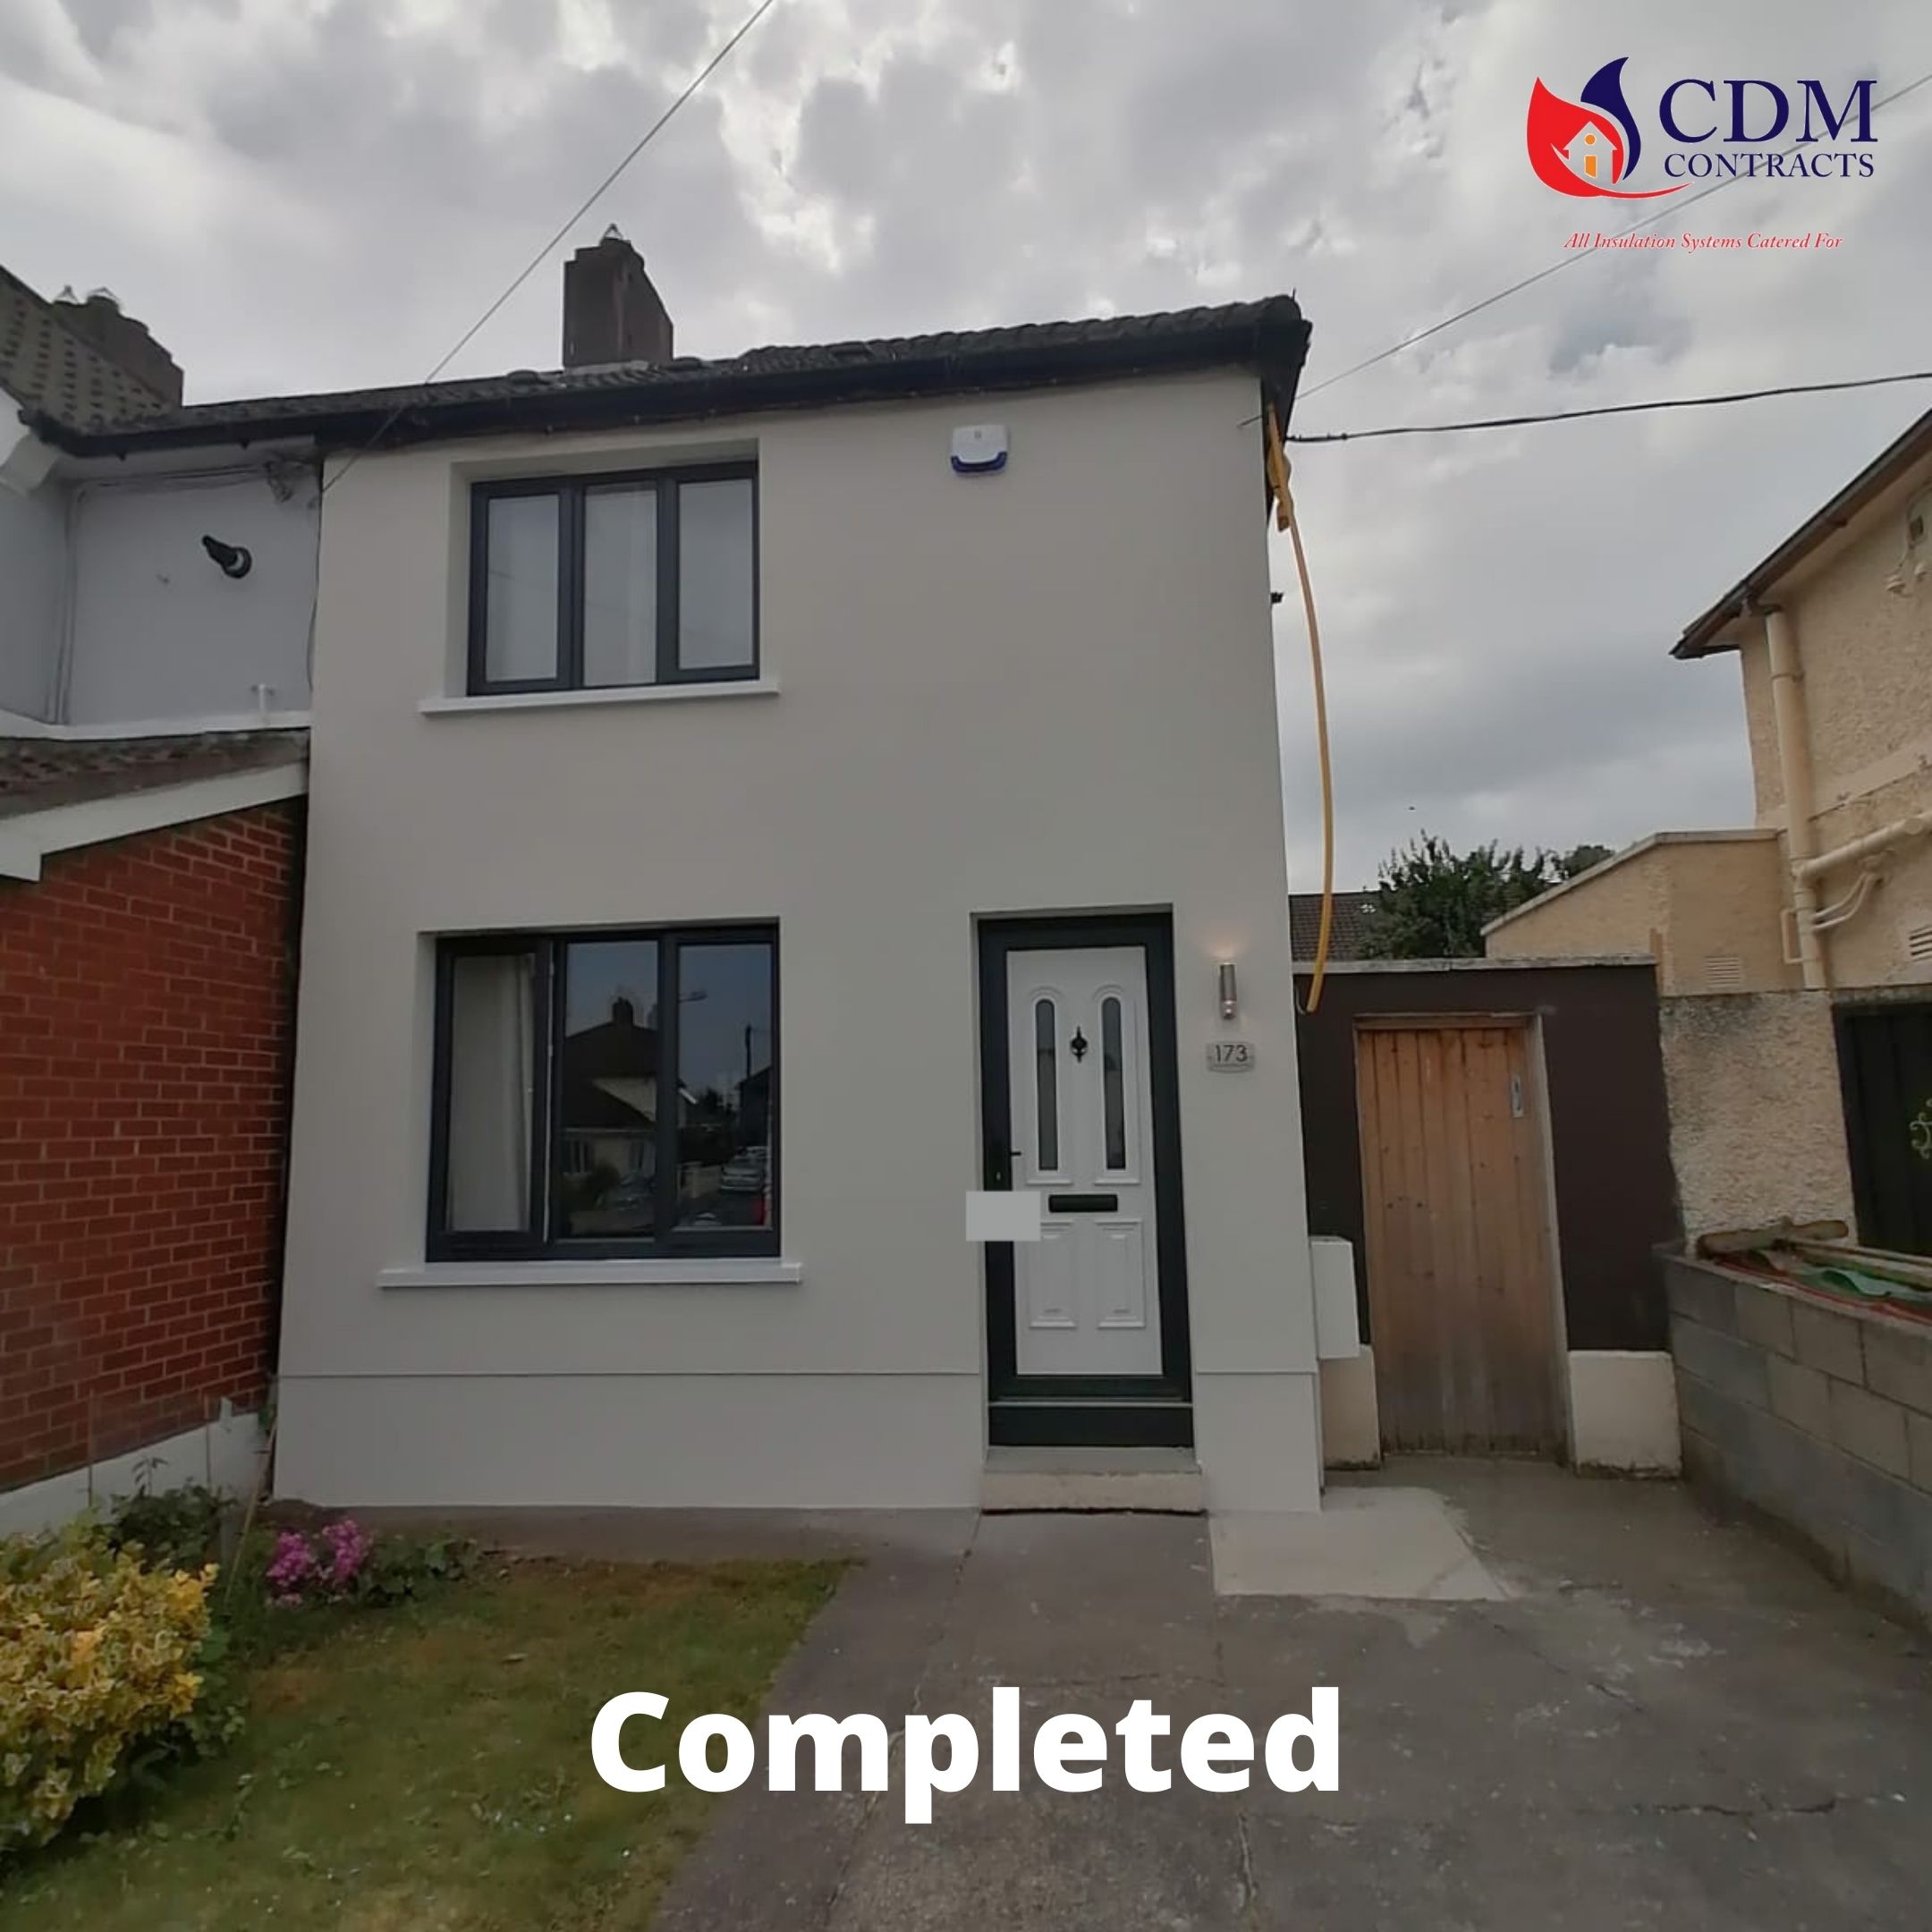 Project: Warmer Homes, Co. Dublin - Completed